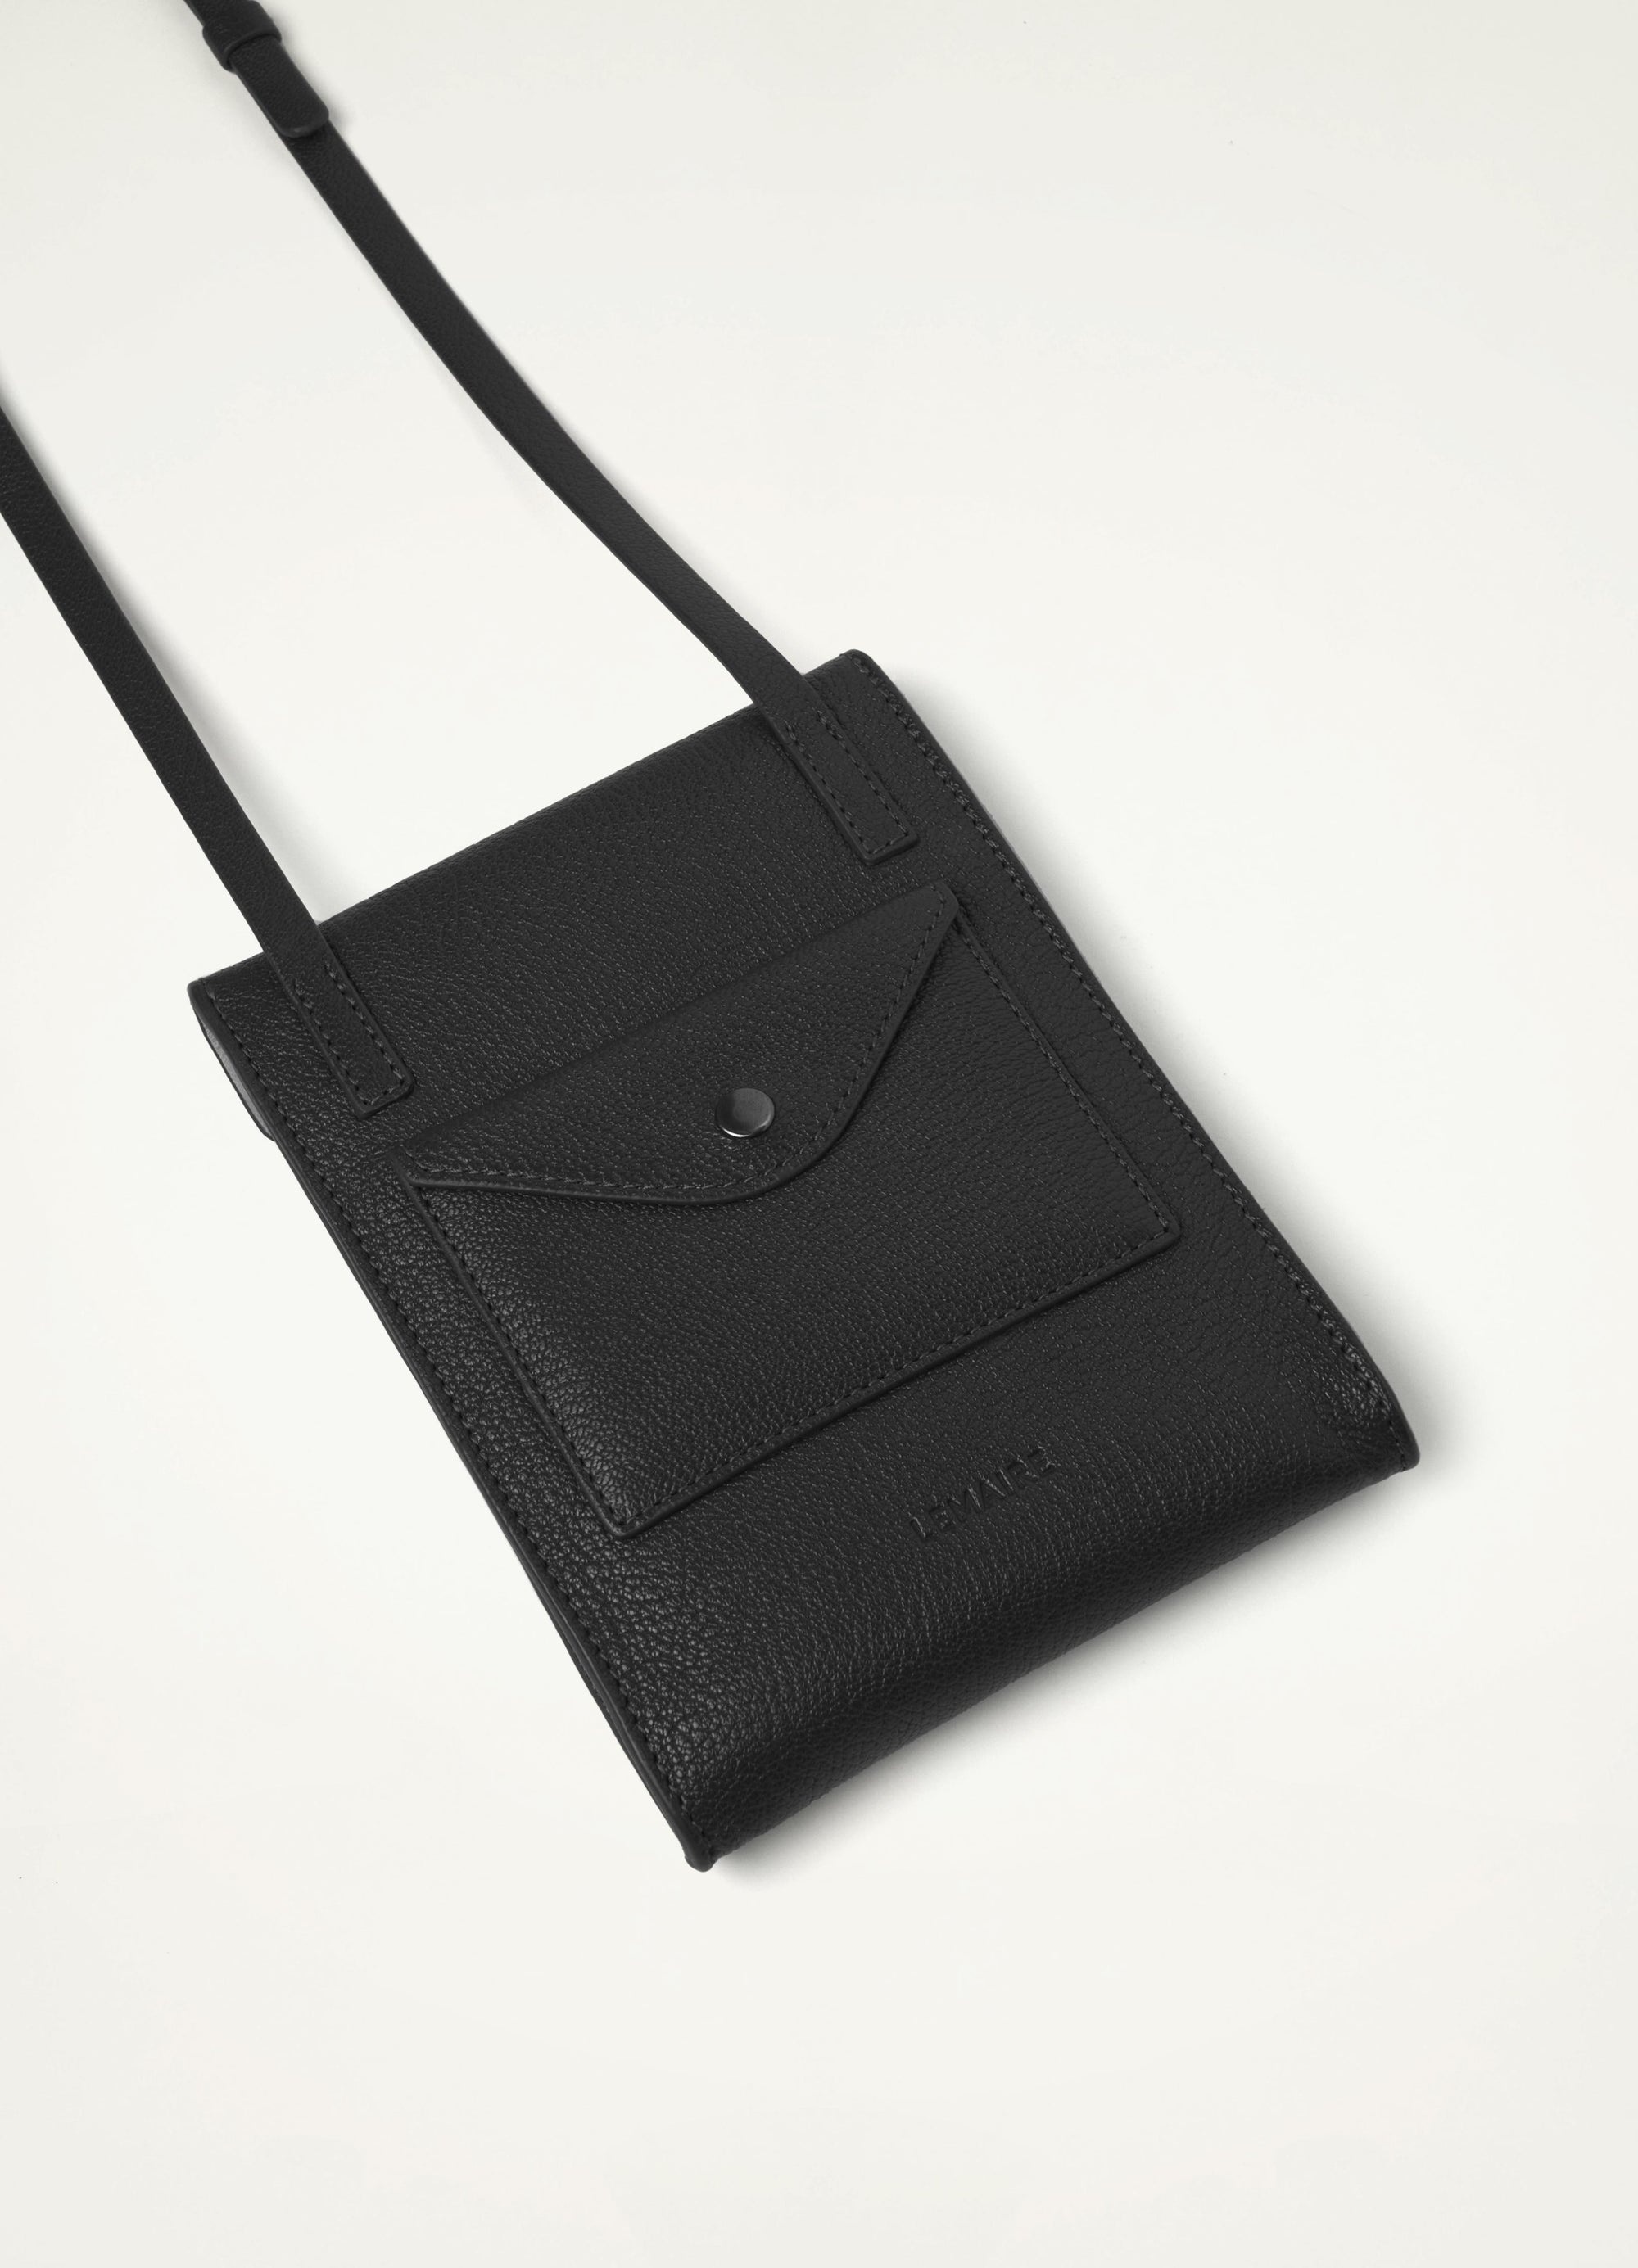 ENVELOPPE WITH STRAP
GOAT LEATHER - 2